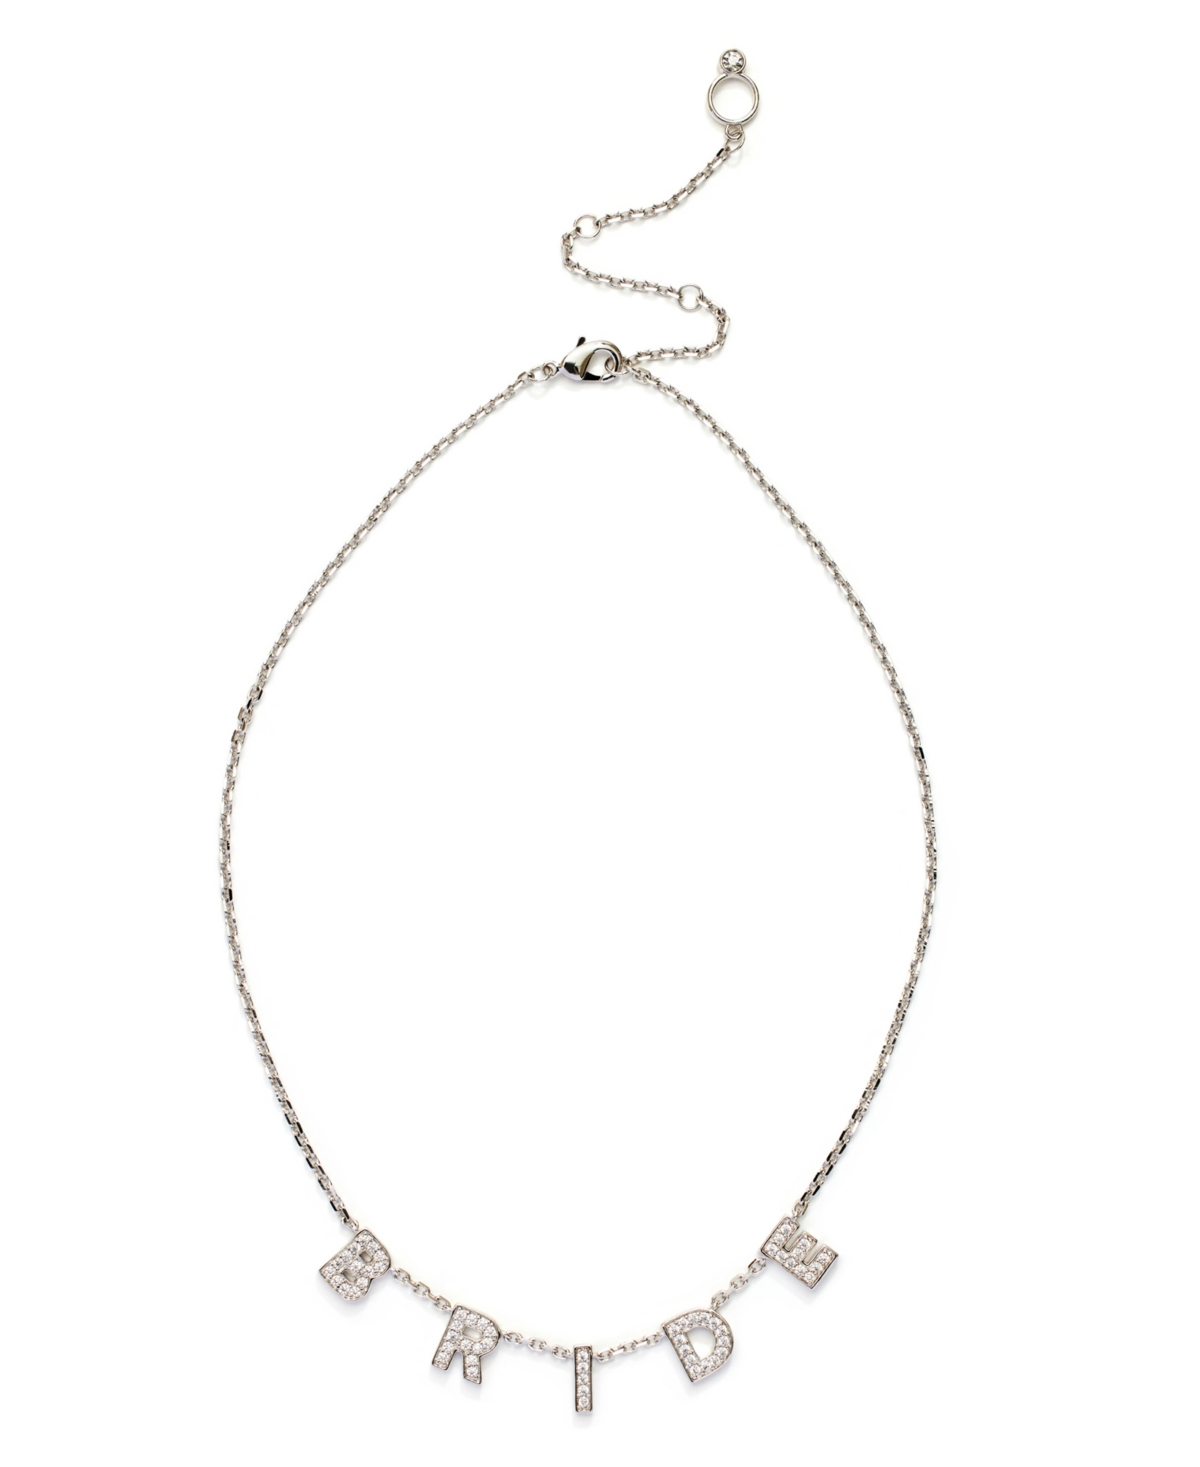 Kleinfeld Faux Stone Pave Bride Bib Necklace In Crystal,rhodium